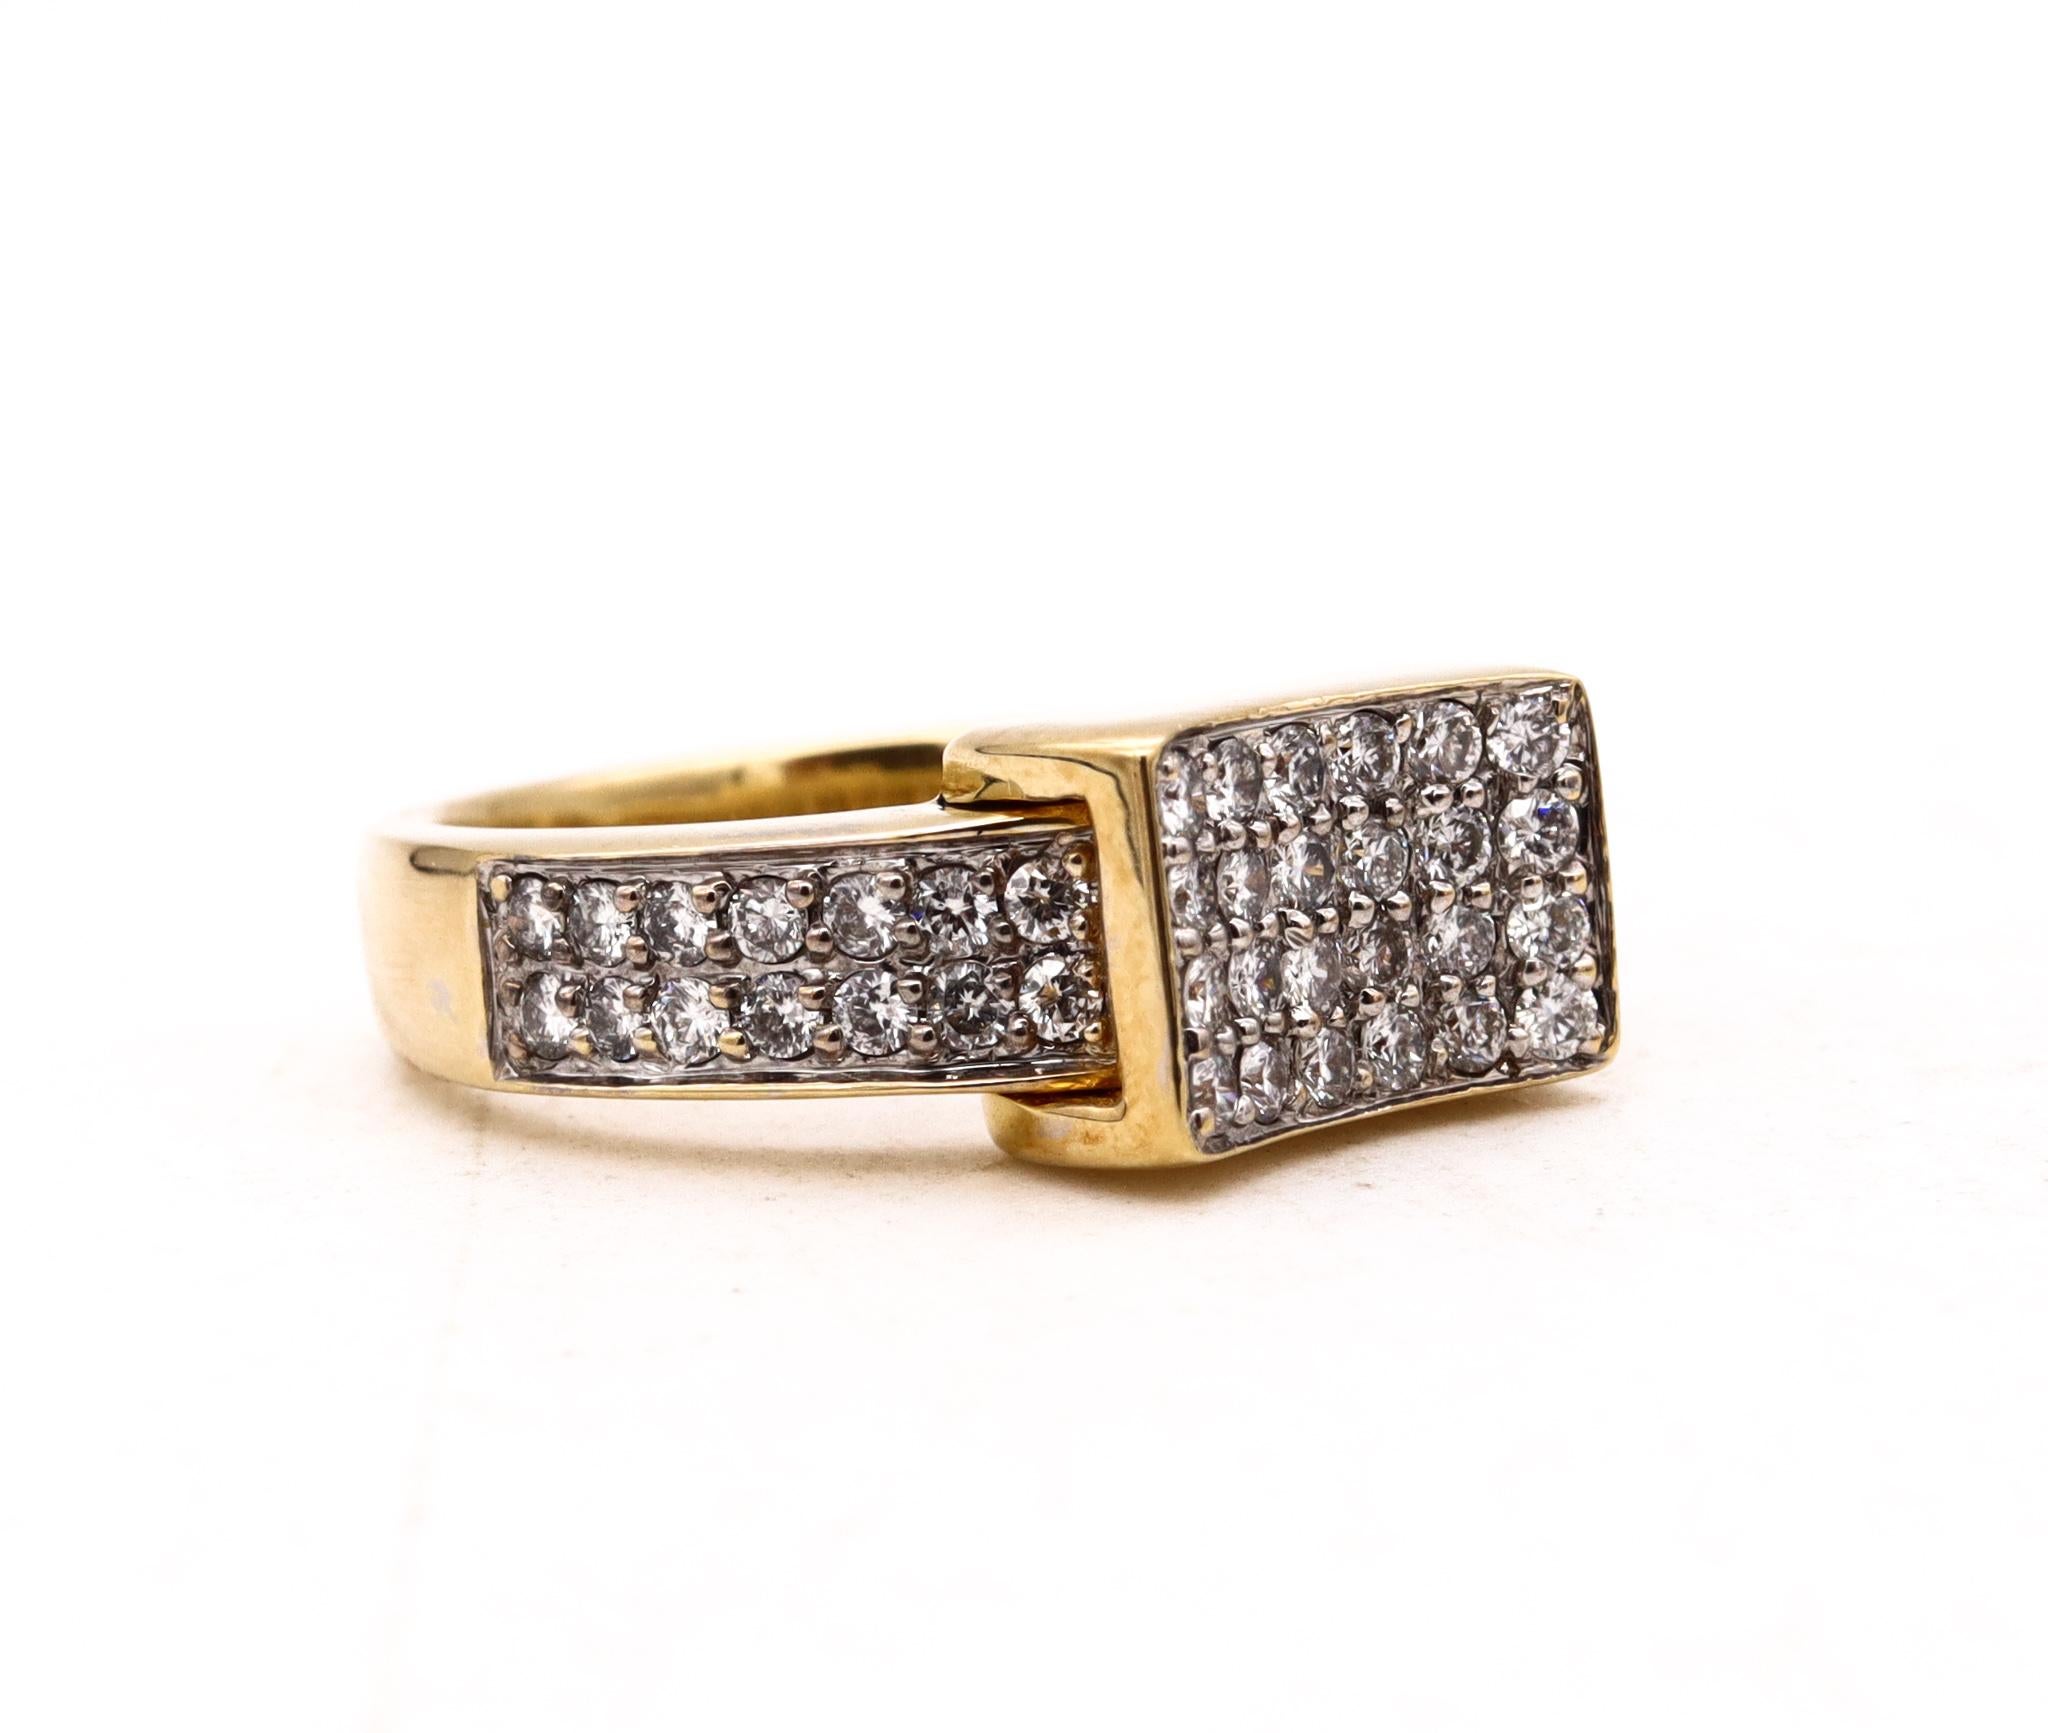 Italian Modernist Geometric Ring in 18Kt Yellow Gold with 1.04 Cts VS Diamonds For Sale 3